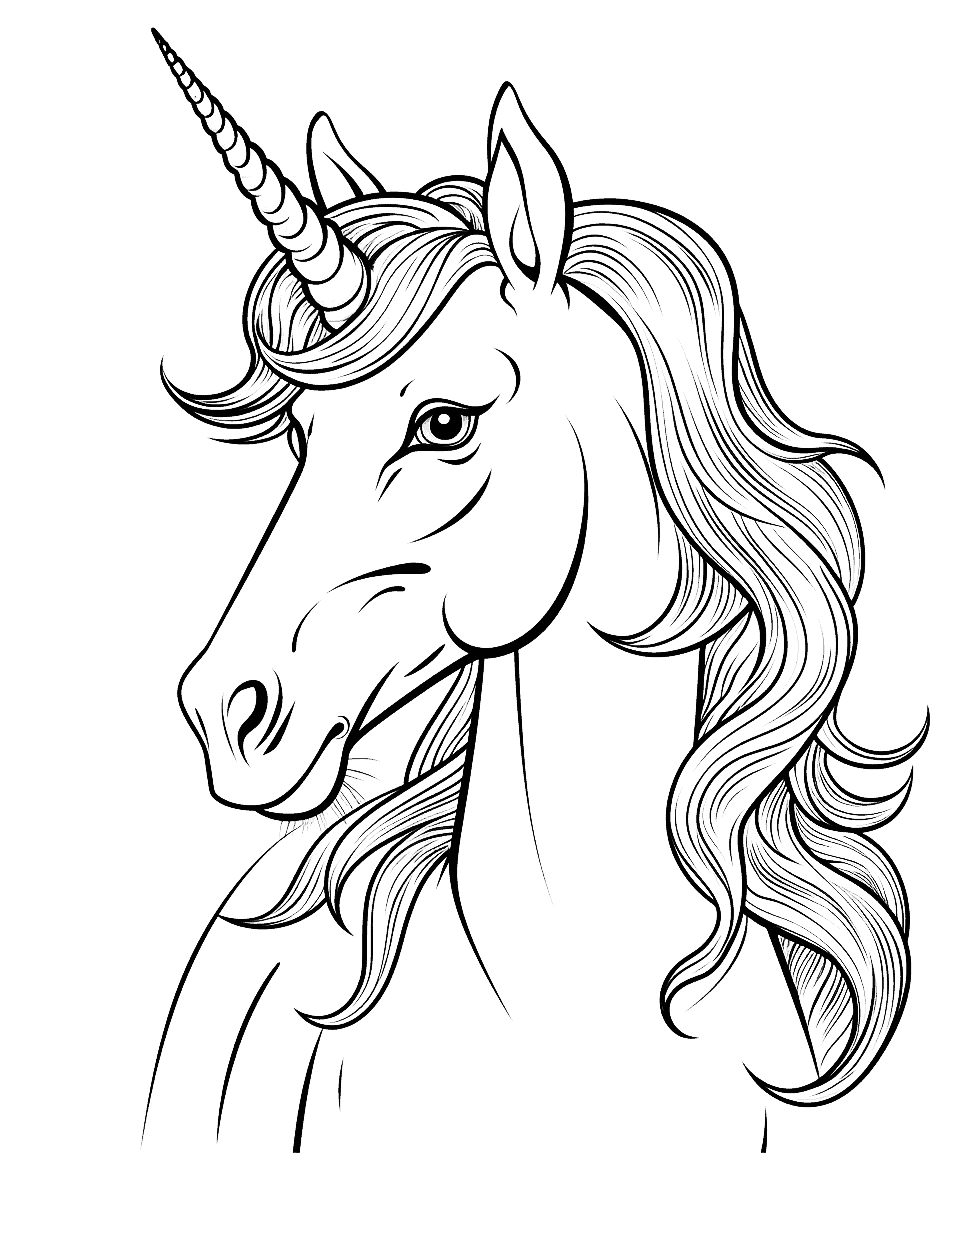 Detailed Unicorn Portrait Coloring Page - An up-close, detailed portrait of a unicorn, emphasizing the eyes, mane, and horn.